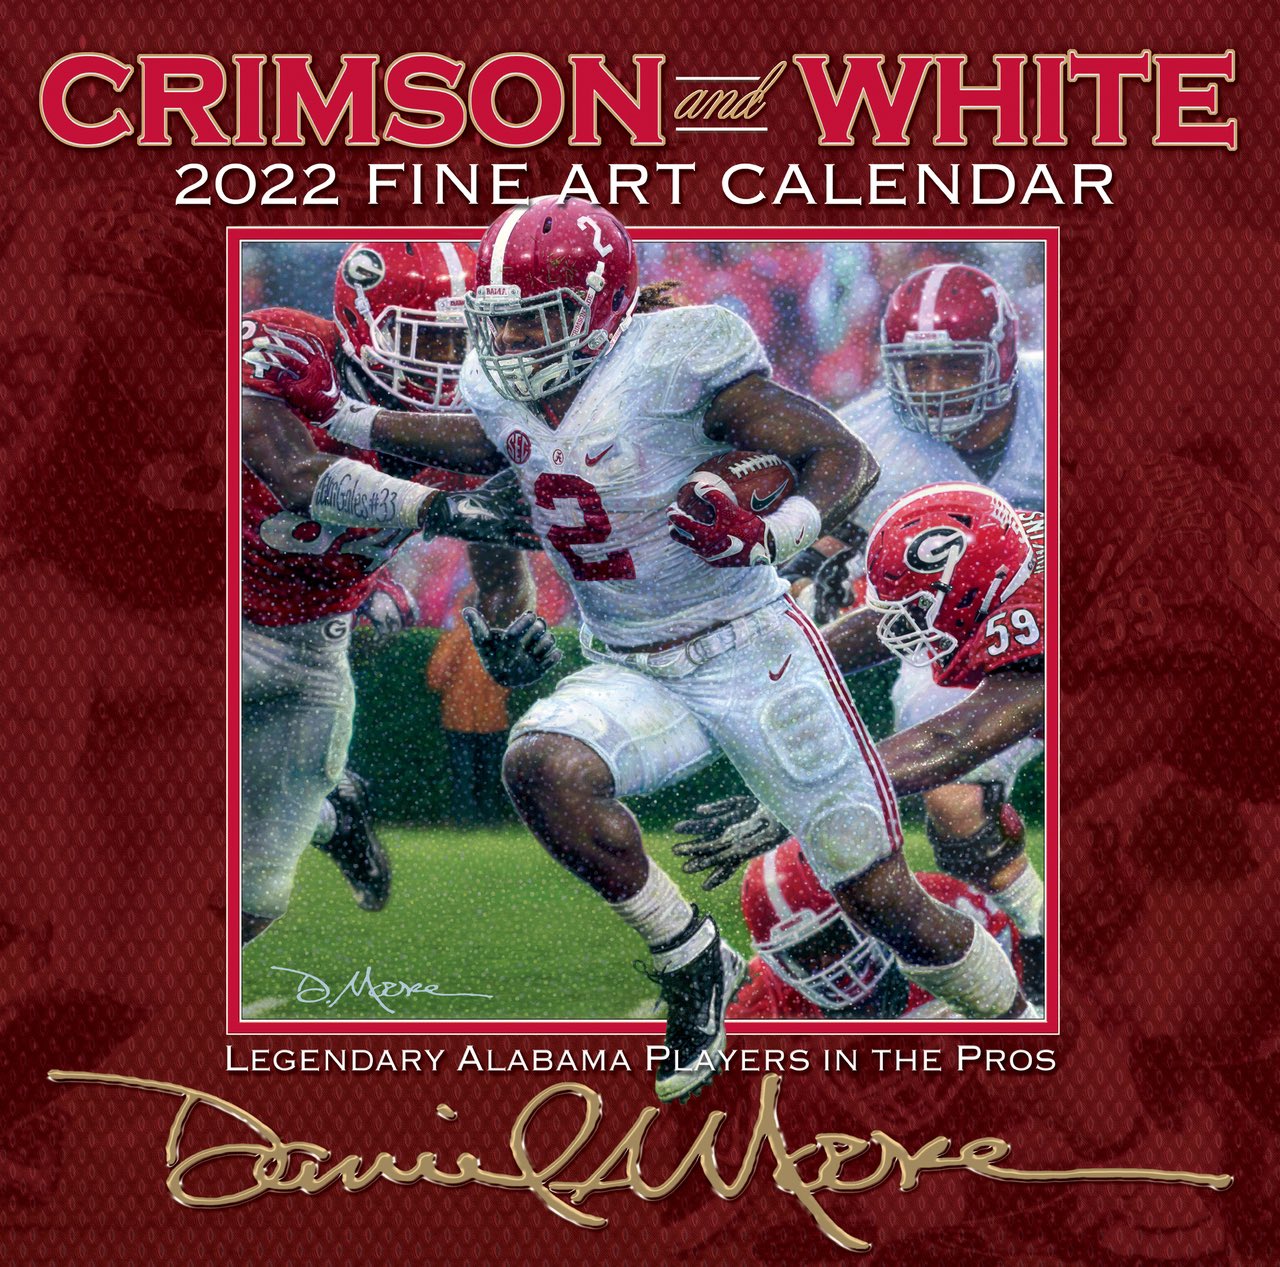 State Of Alabama 2022 Calendar Daniel Moore Gallery On Twitter: "Our 2022 Crimson & White Fine Art Calendar  Features #Alabama Players That Went On To Be First Team All-Pros! Save $5  By Pre-Ordering Yours Now At Our